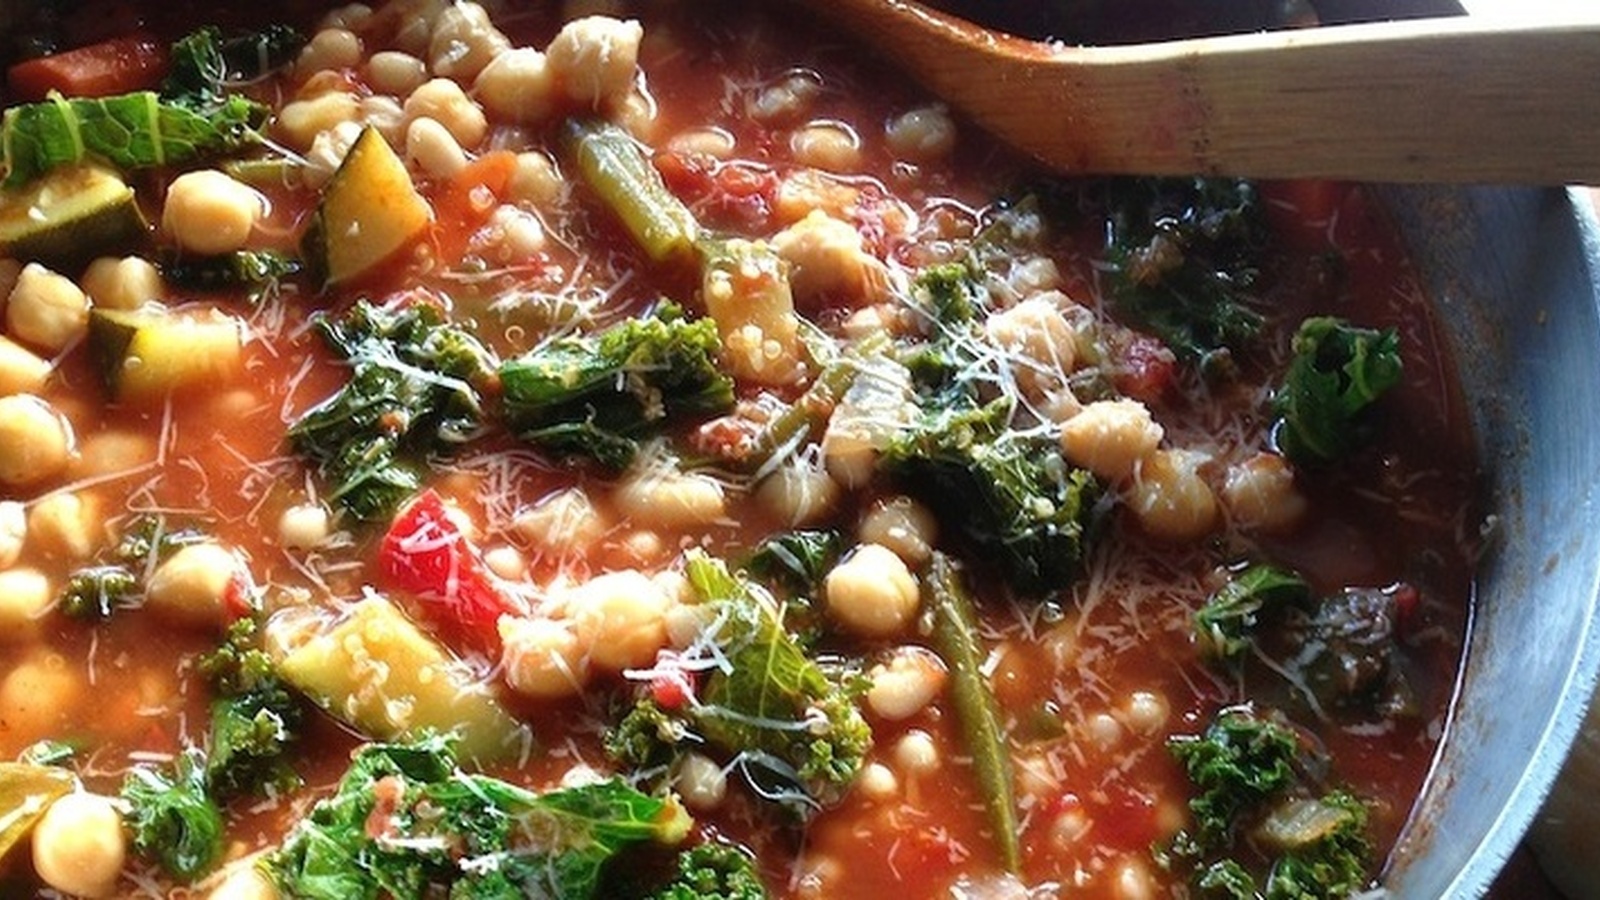 Warming Minestrone Soup With Quinoa & Kale (Free Recipe)